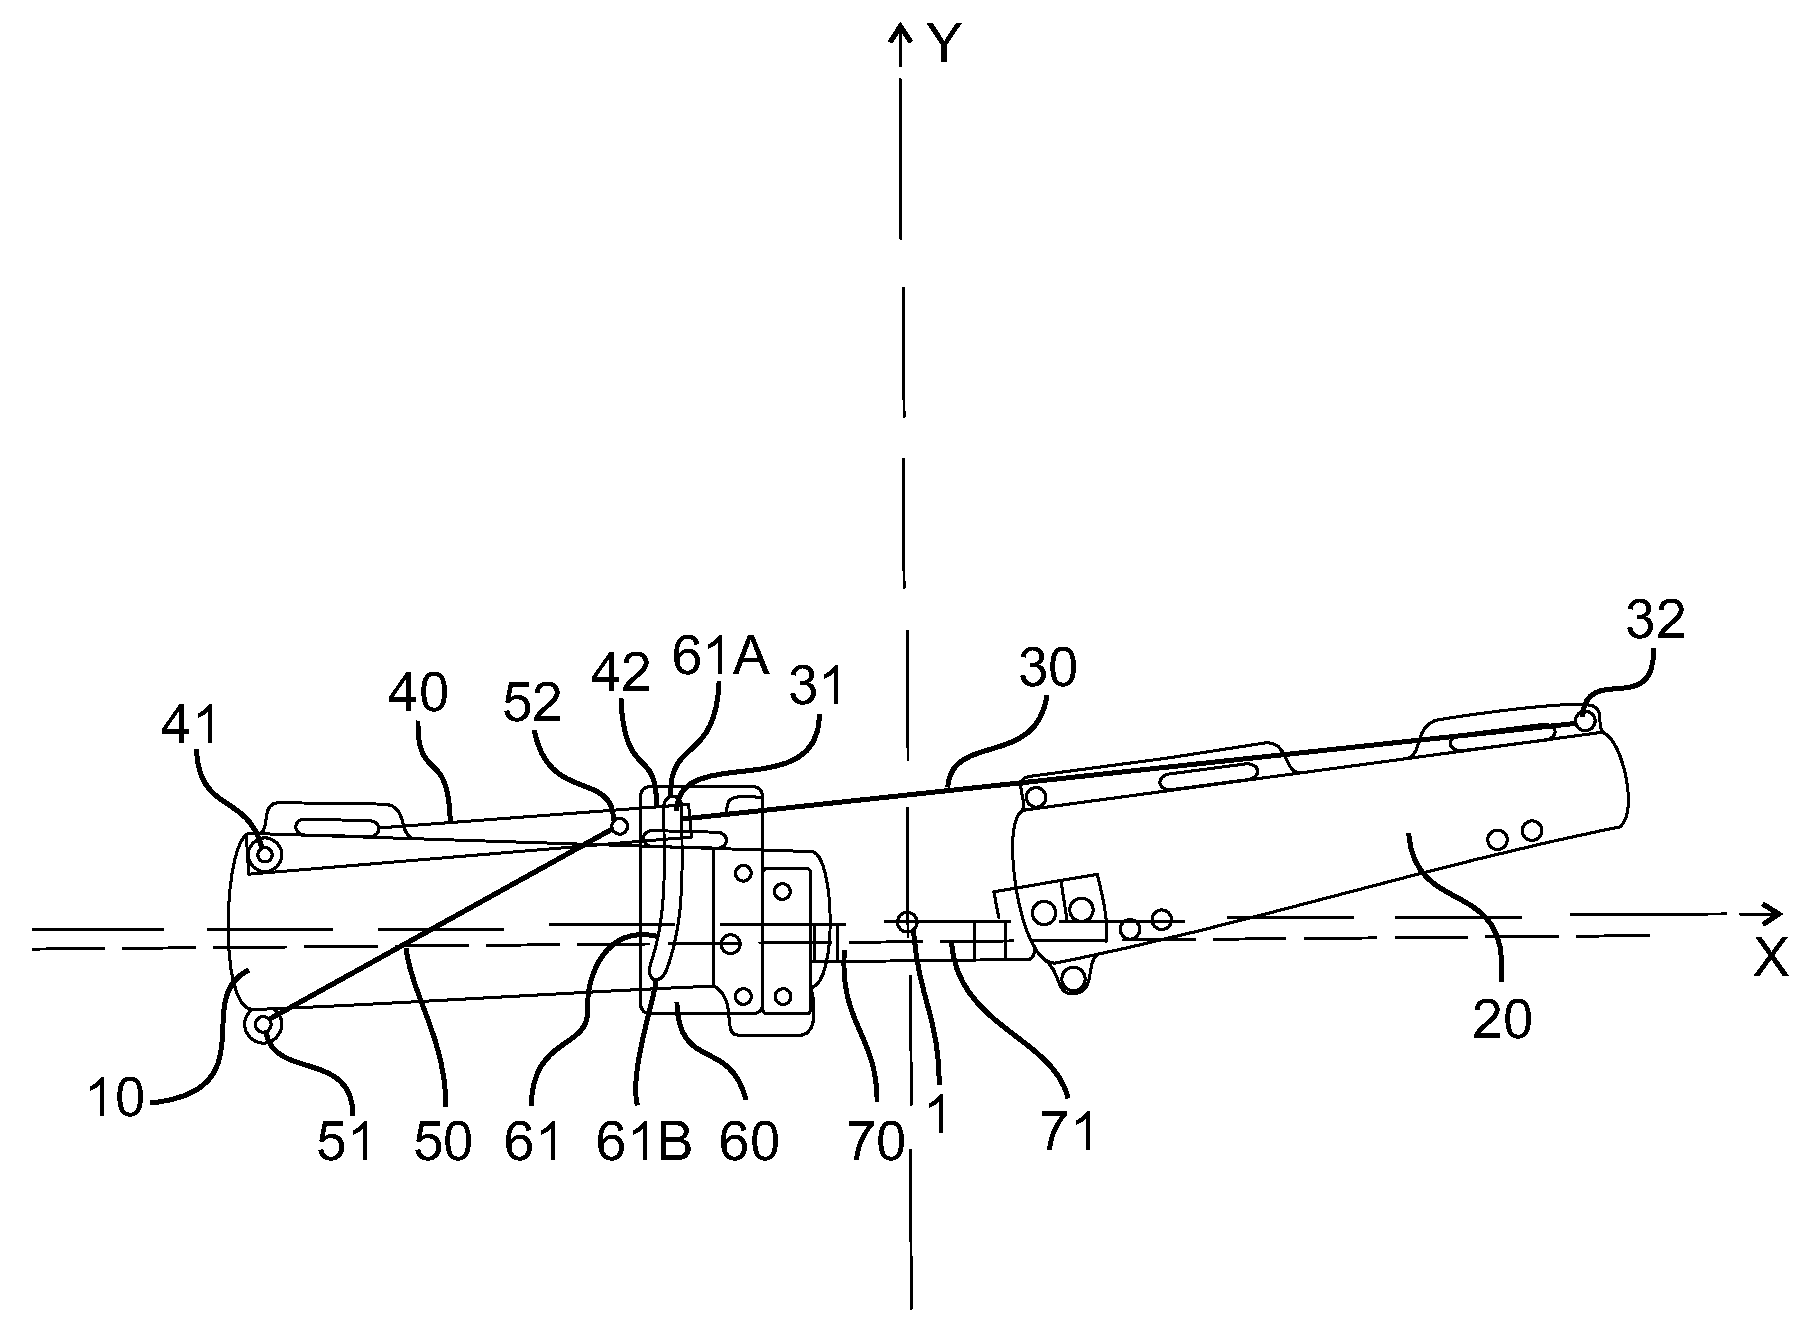 Muscle force assisting device and its operating method